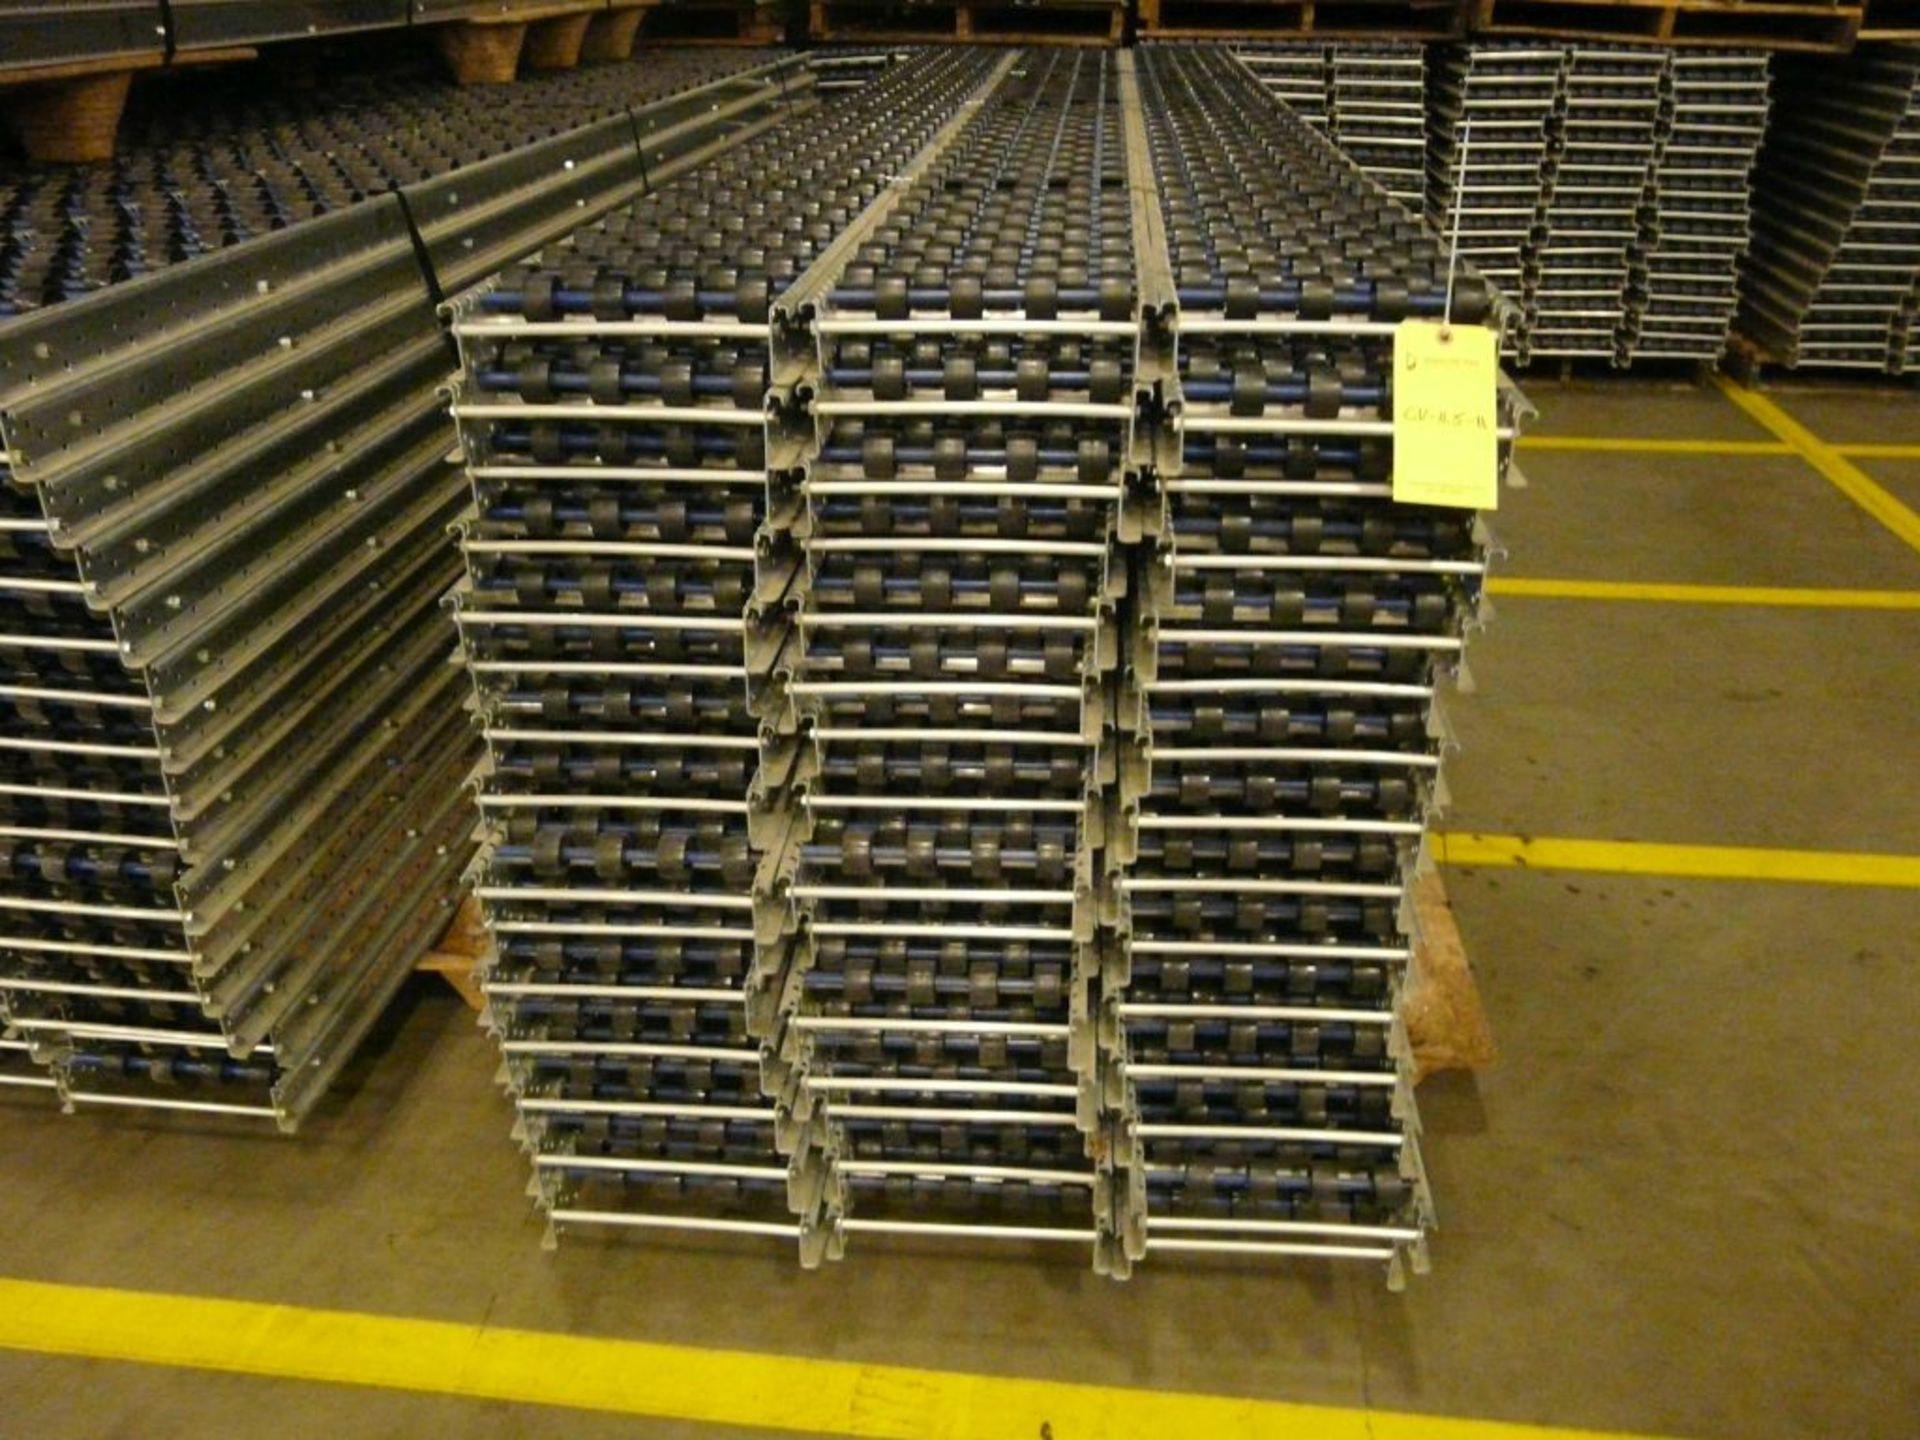 Lot of (90) SpanTrack Wheelbed Carton Flow Conveyors - 11.5'L x 11"W; Tag: 223565 - $30 Lot - Image 2 of 4